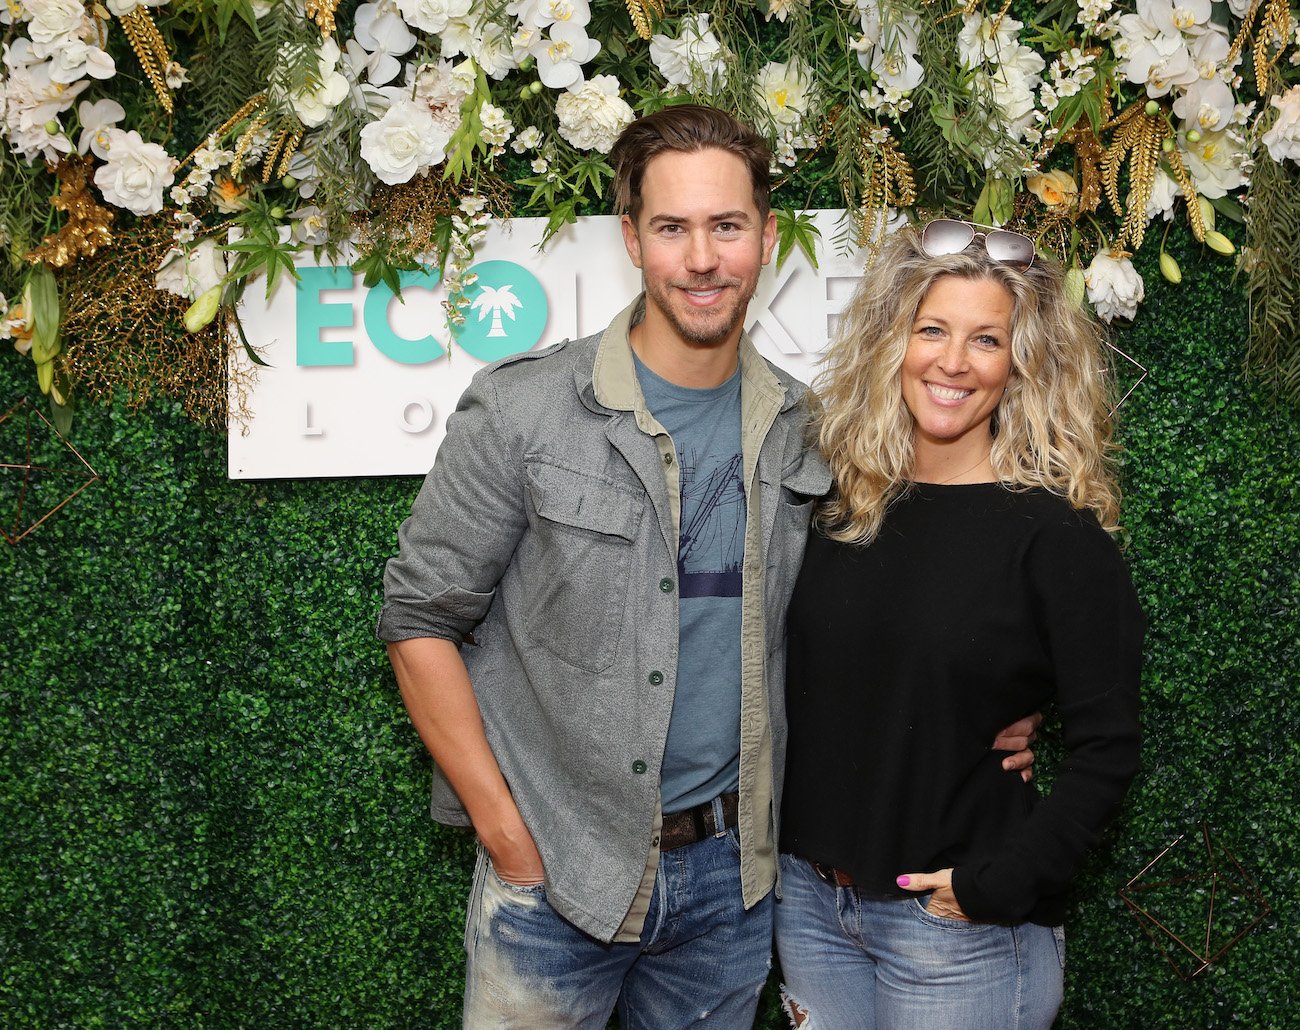 Wes Ramsey and Laura Wright posing next to each other in front of plants